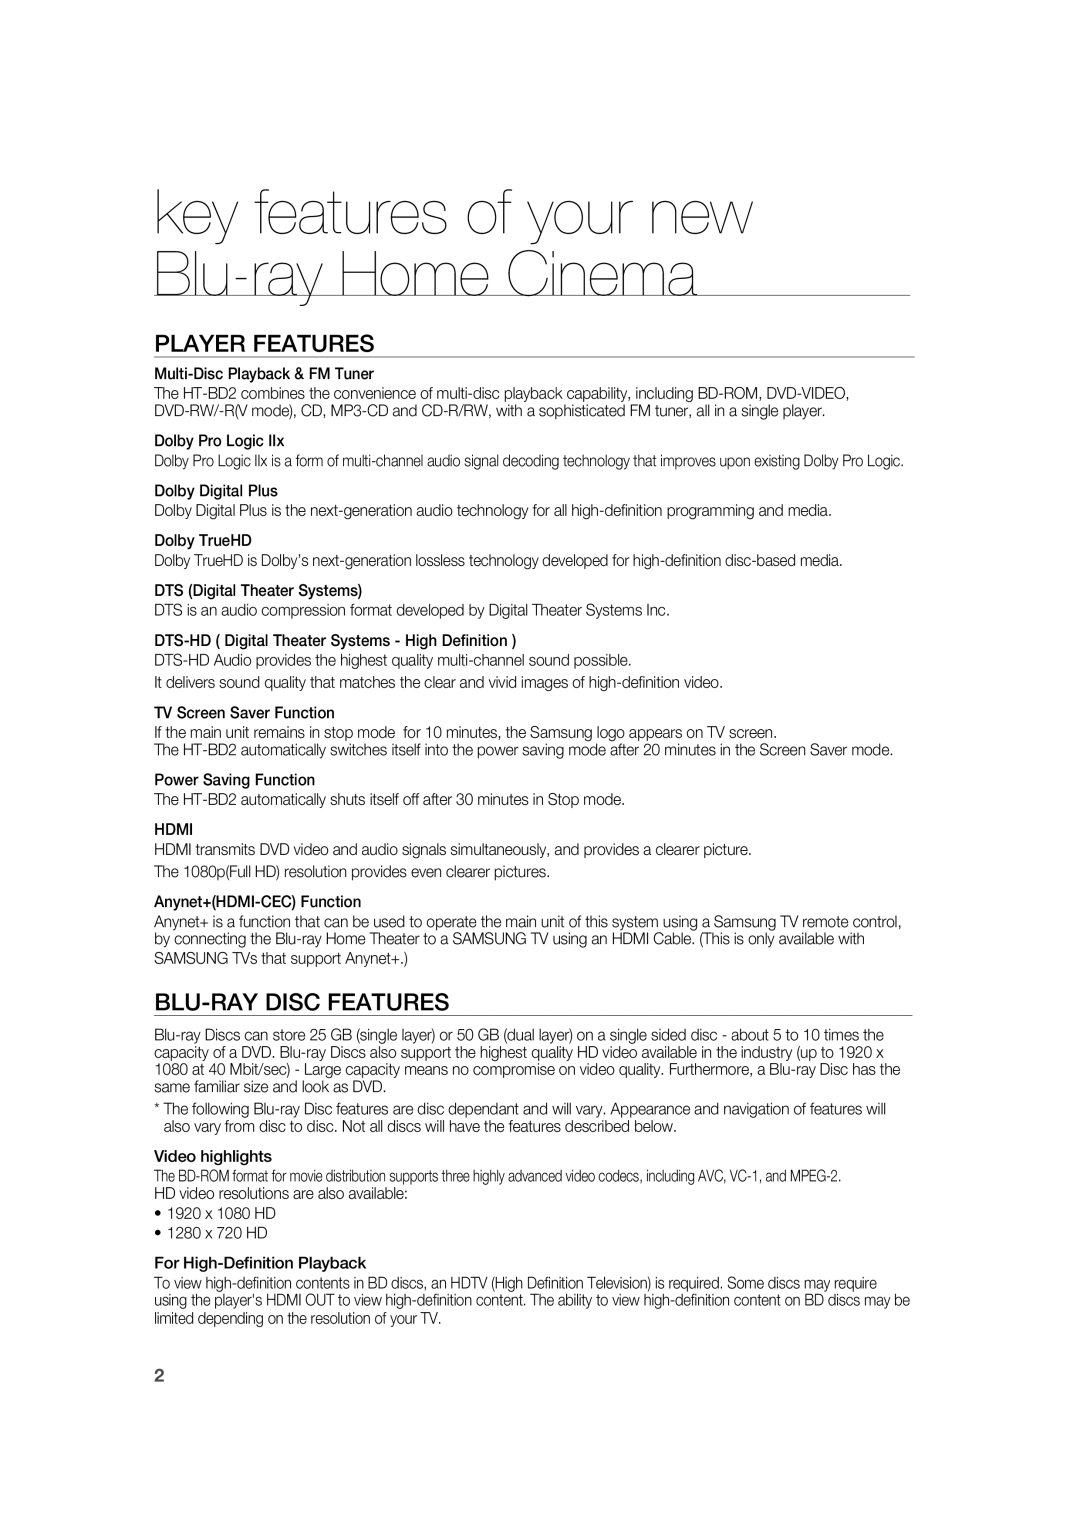 Samsung AH68-02019K manual key features of your new Blu-rayHome Cinema, Player Features, Blu-Raydisc Features 